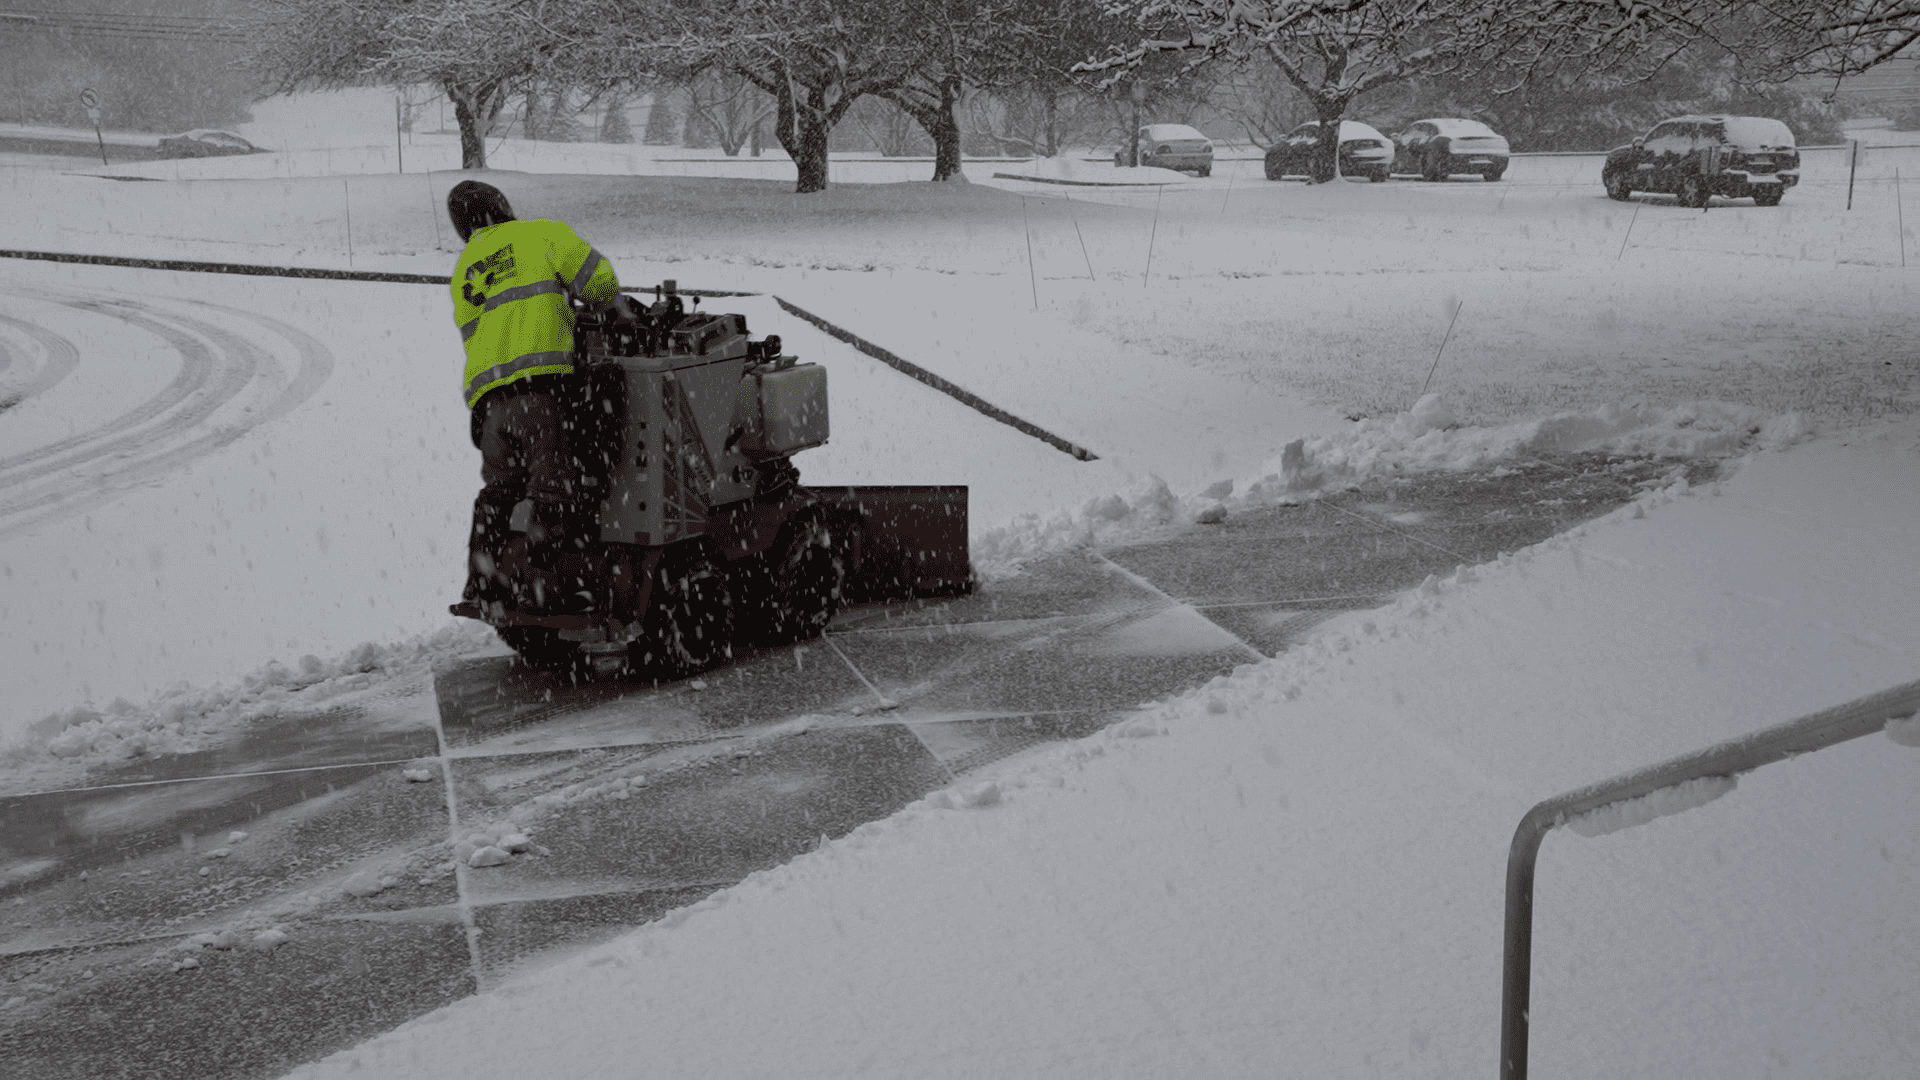 A man in a yellow vest working on a commercial snow blower for snow and ice management.